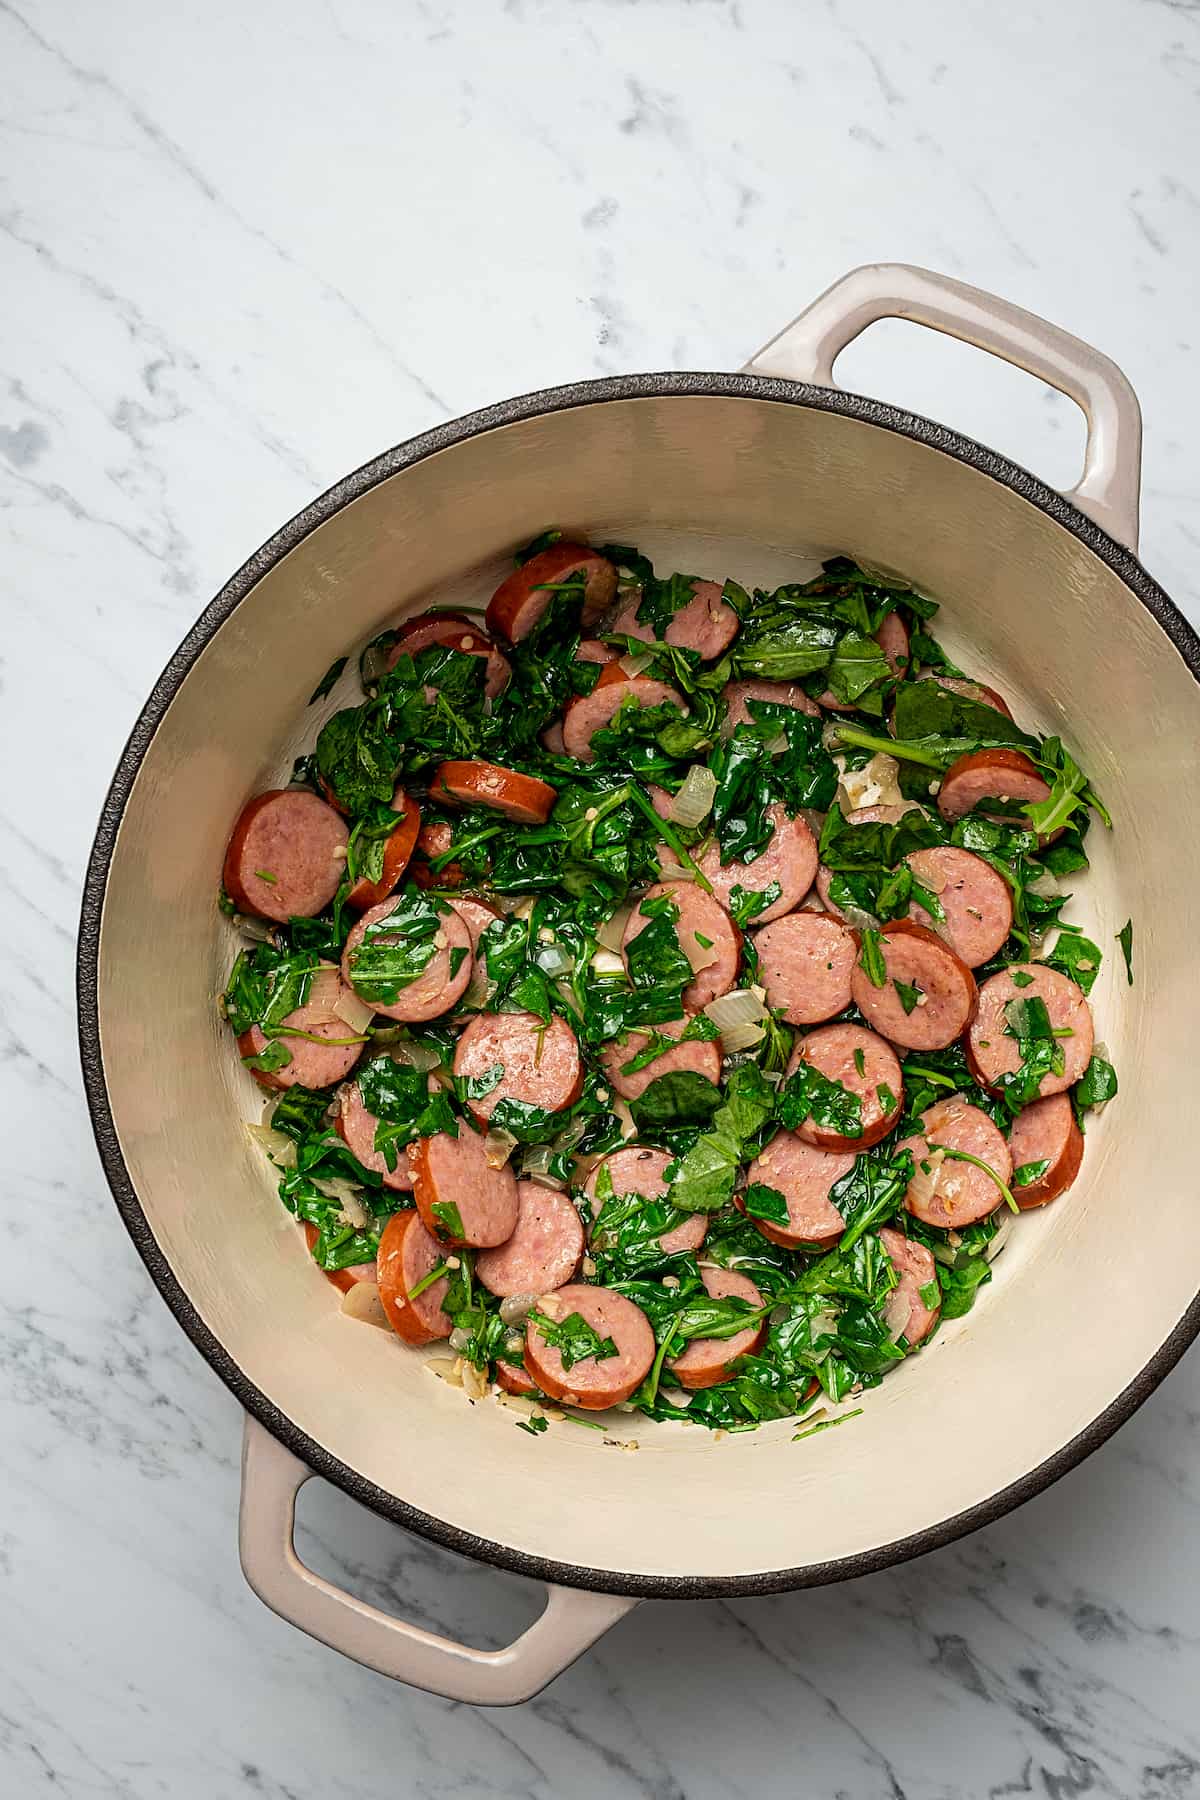 Sausage, kale, and other potato soup recipe ingredients cooking in a soup pot.